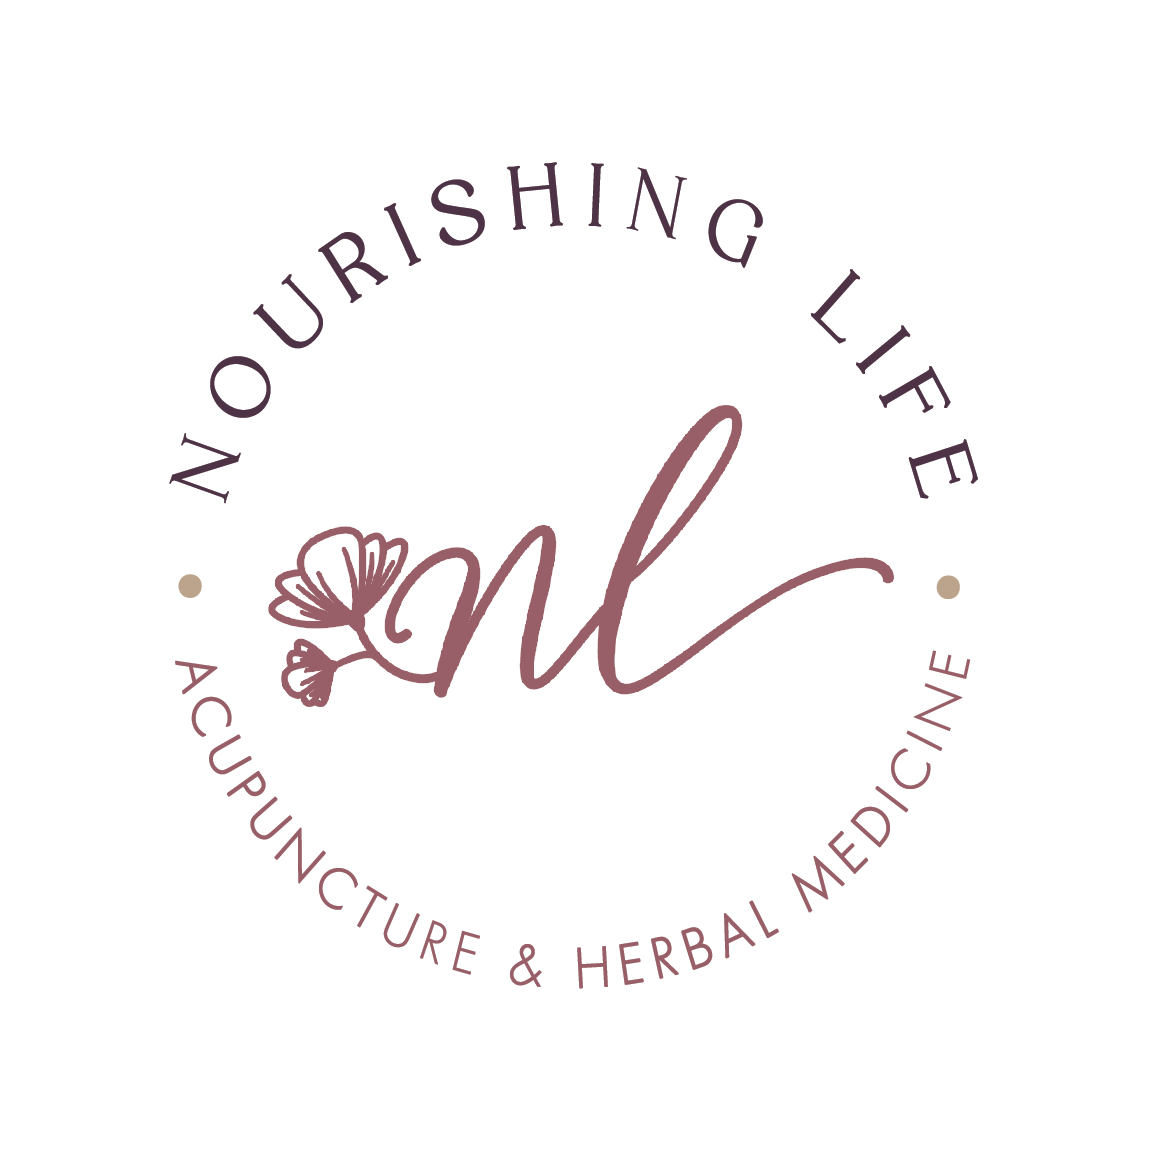 Nourishing Life Acupuncture and Herbal Medicine